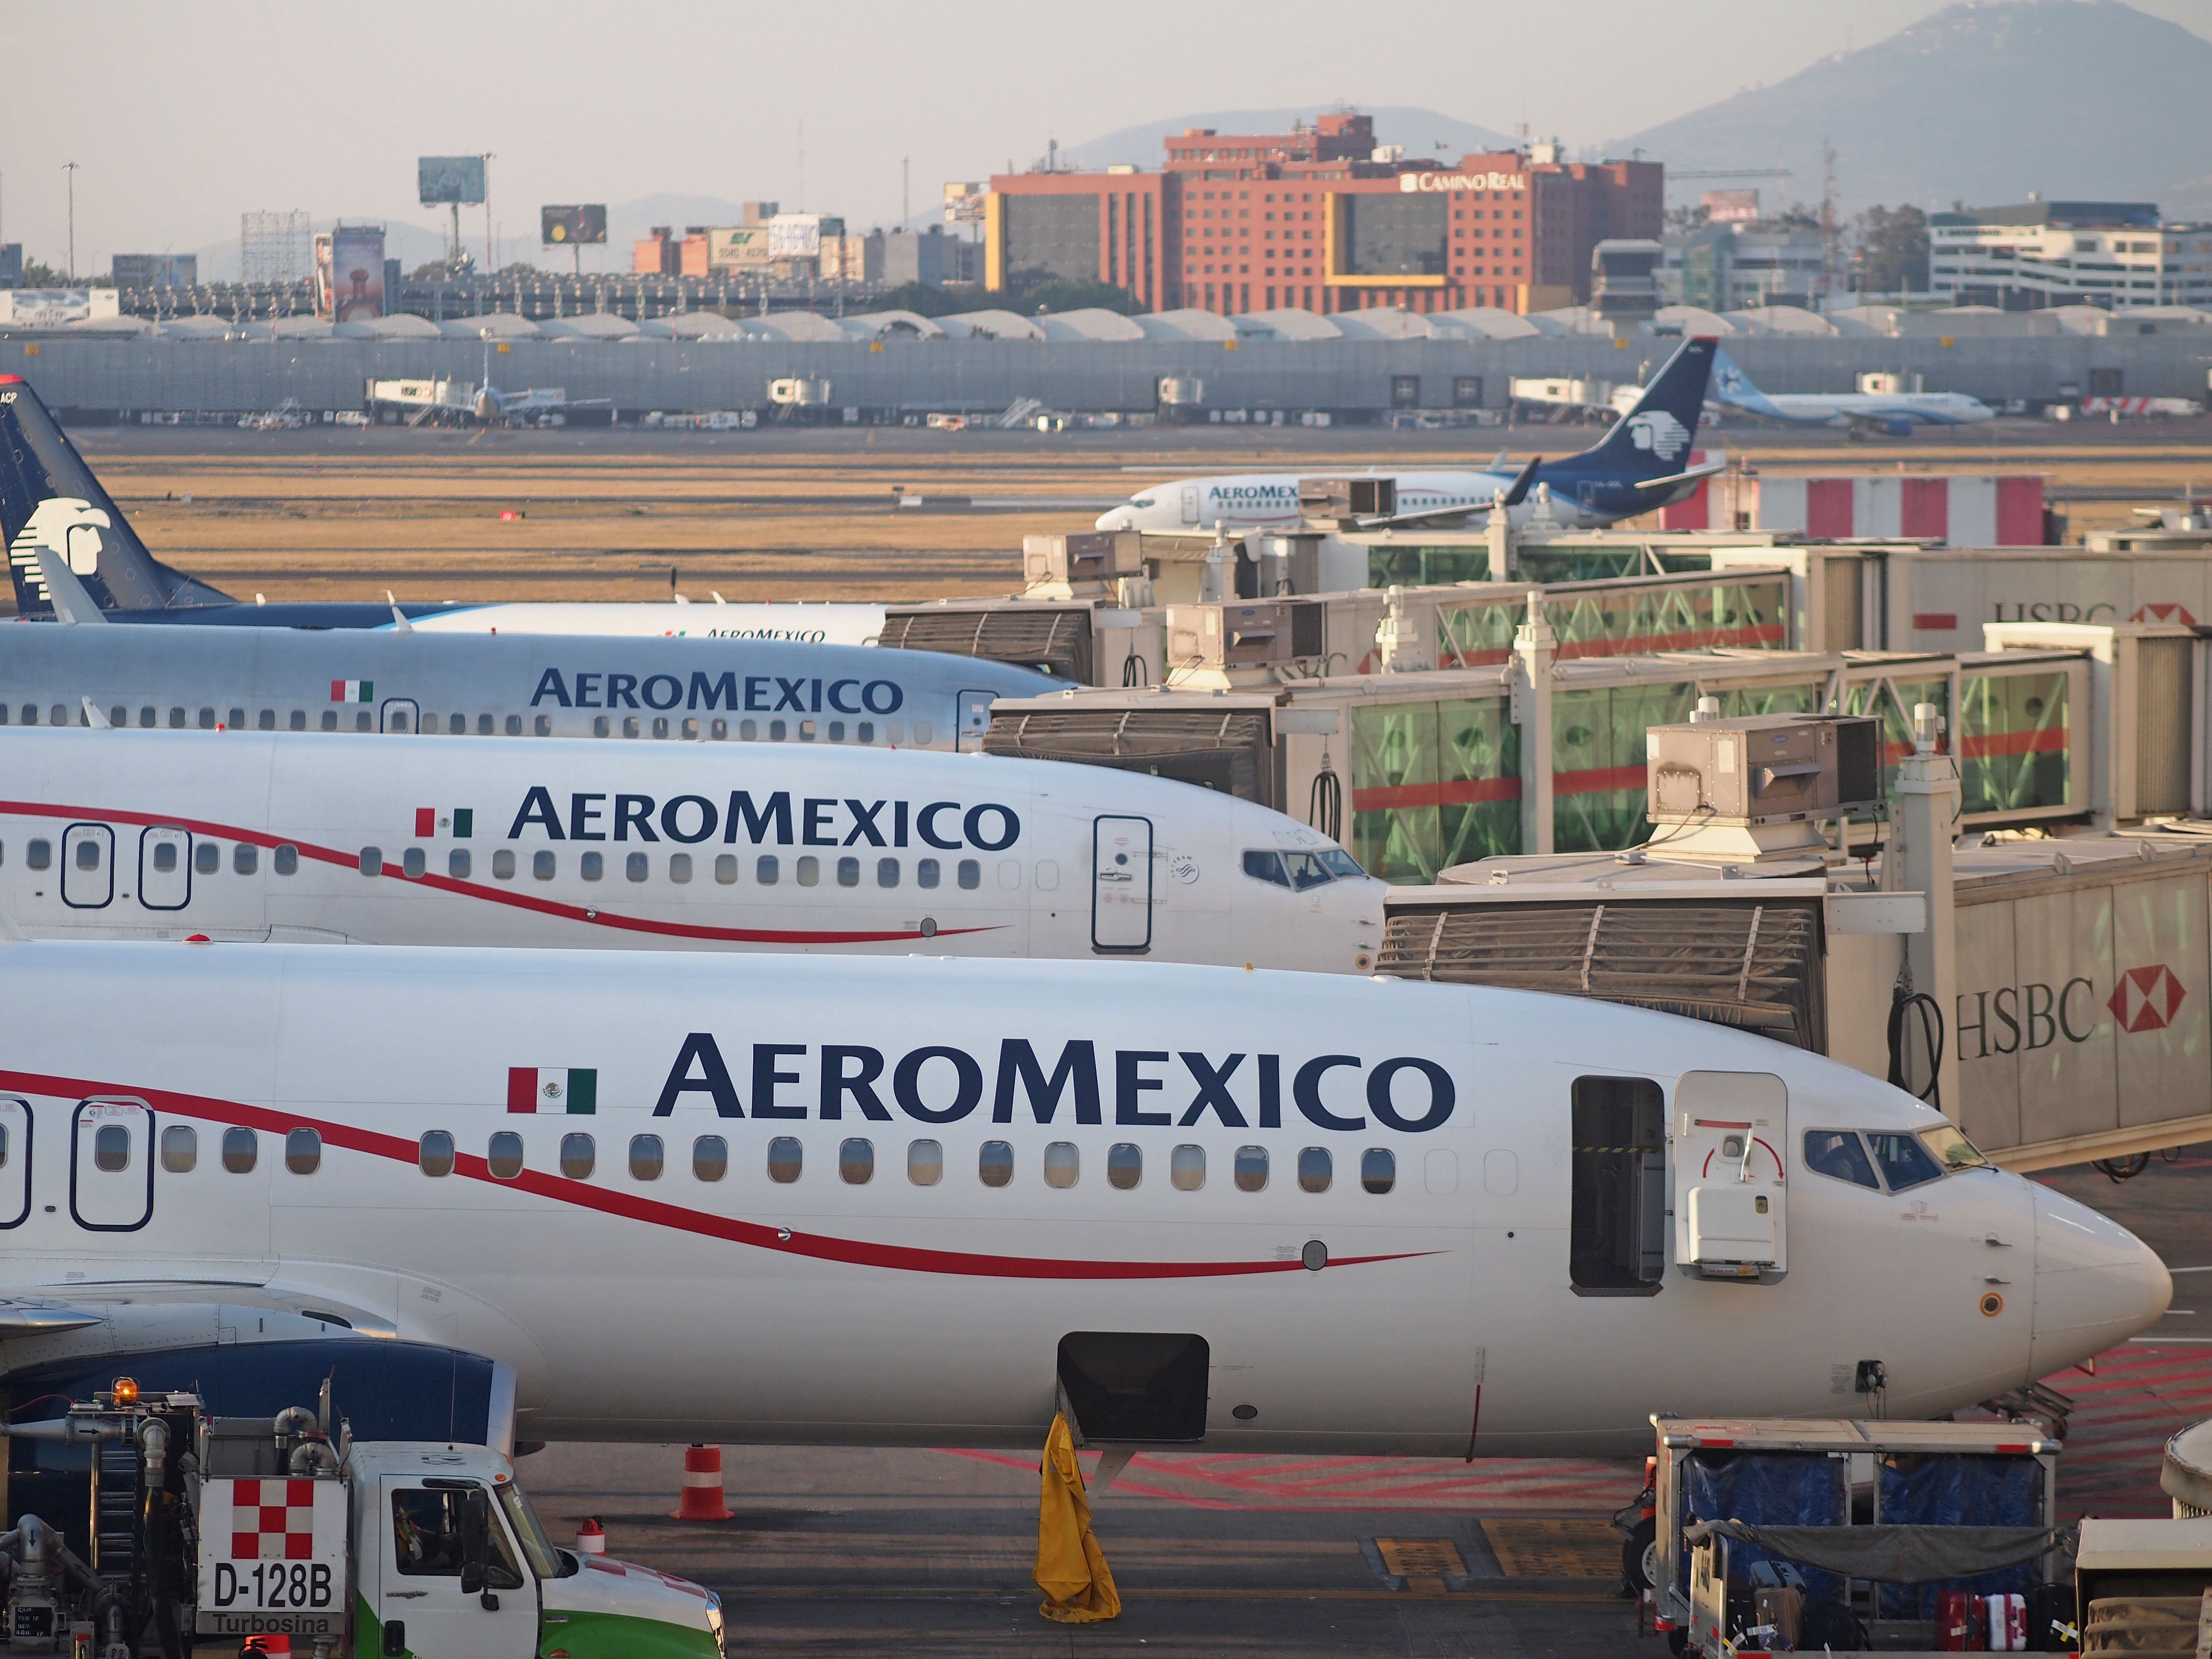 Several Aeromexico aircraft lined up in Mexico City (1)